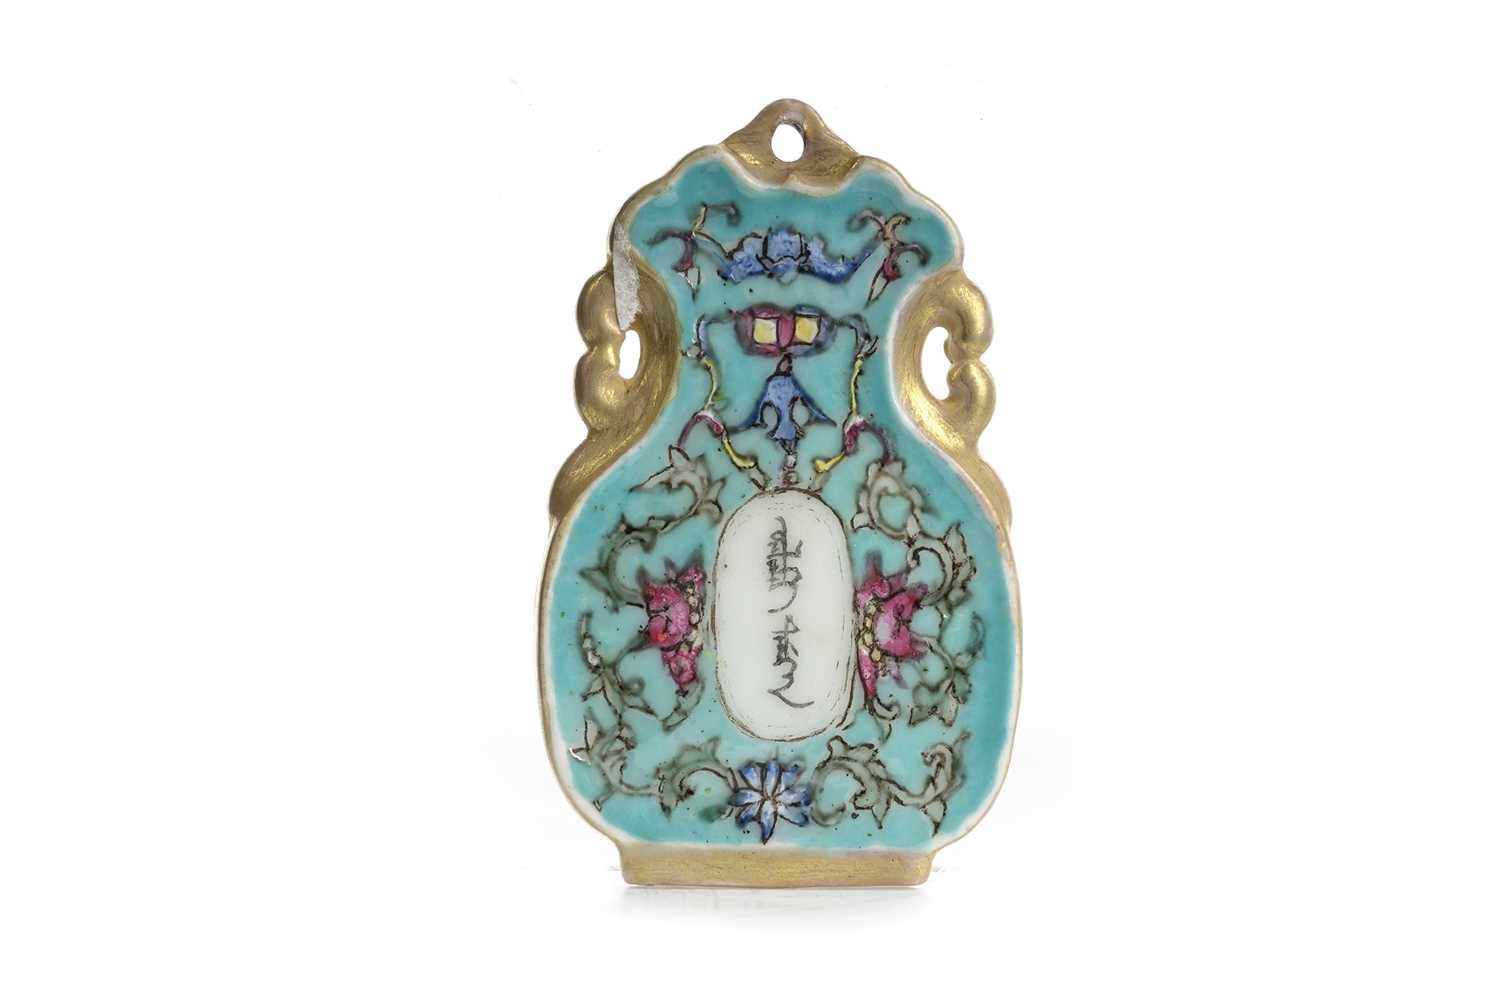 CHINESE FAMILLE ROSE PENDANT, LATE 19TH/EARLY 20TH CENTURY